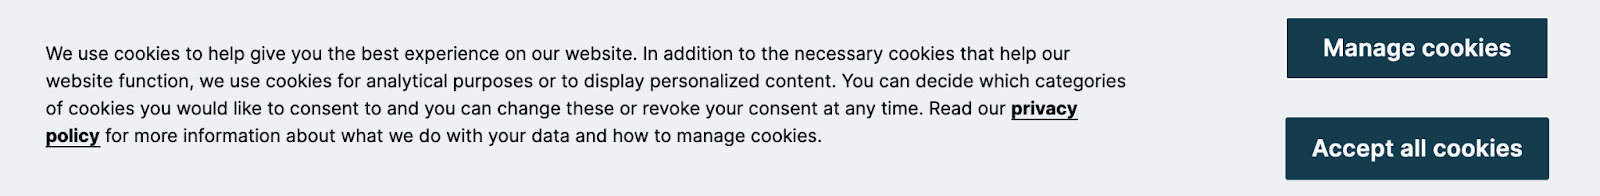 cookie acceptance pop up from a website